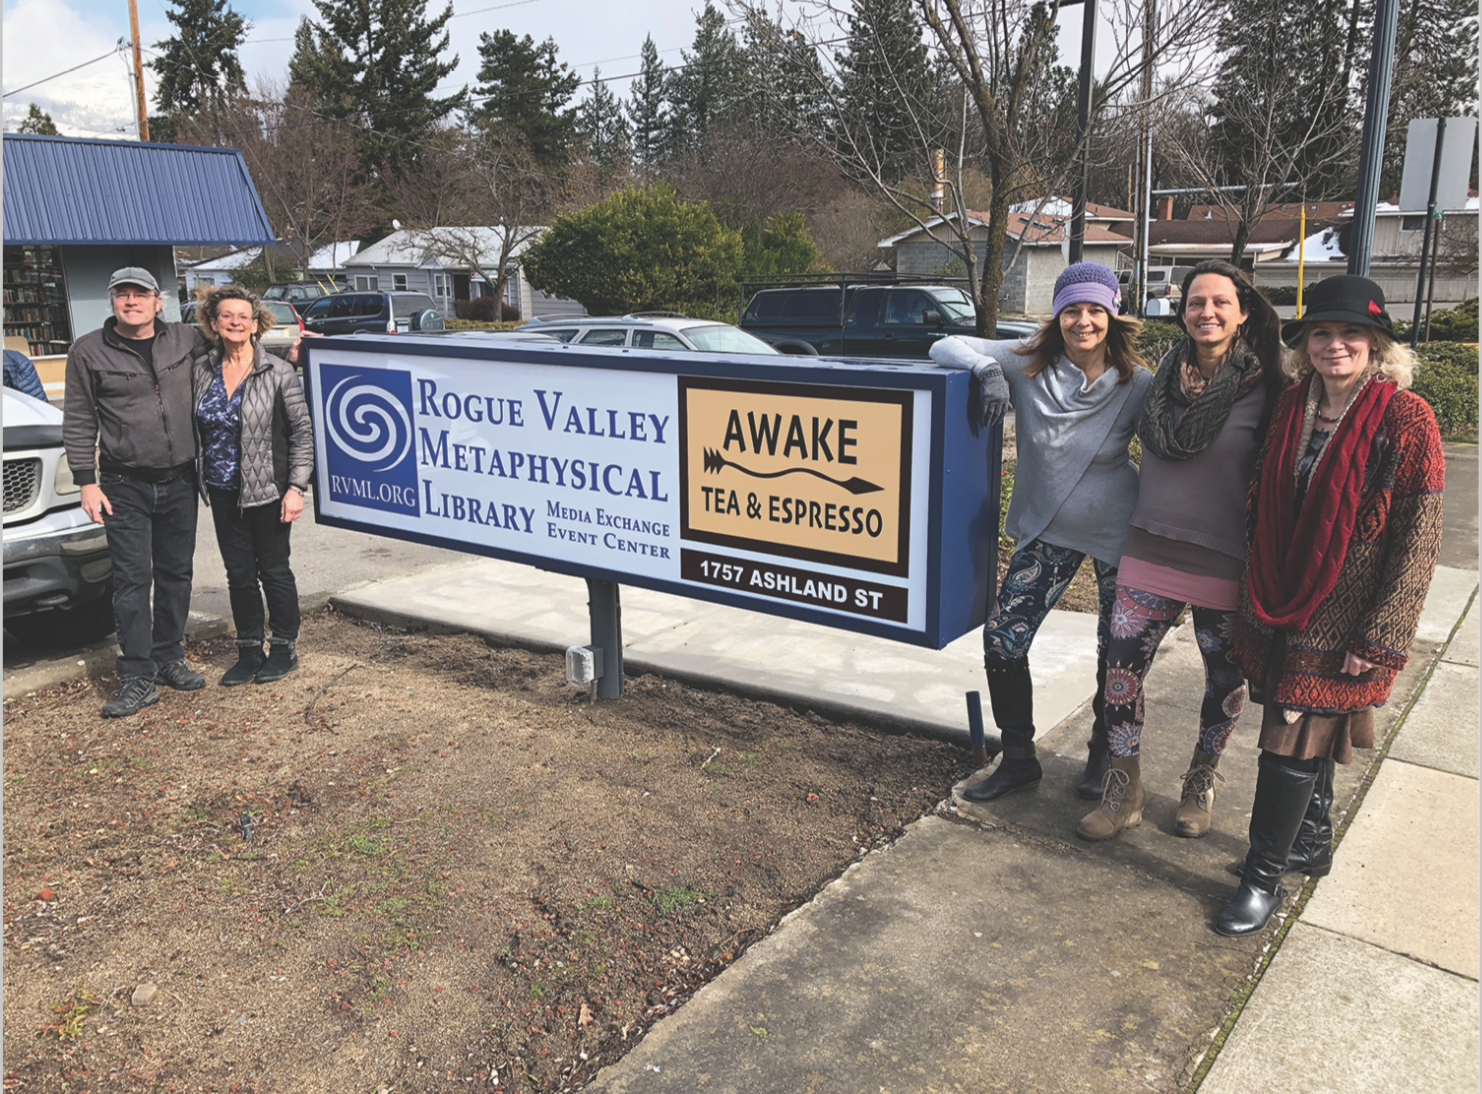 Rogue Valley Metaphysical Library and Awake Café/Gallery Grand Opening Announcement